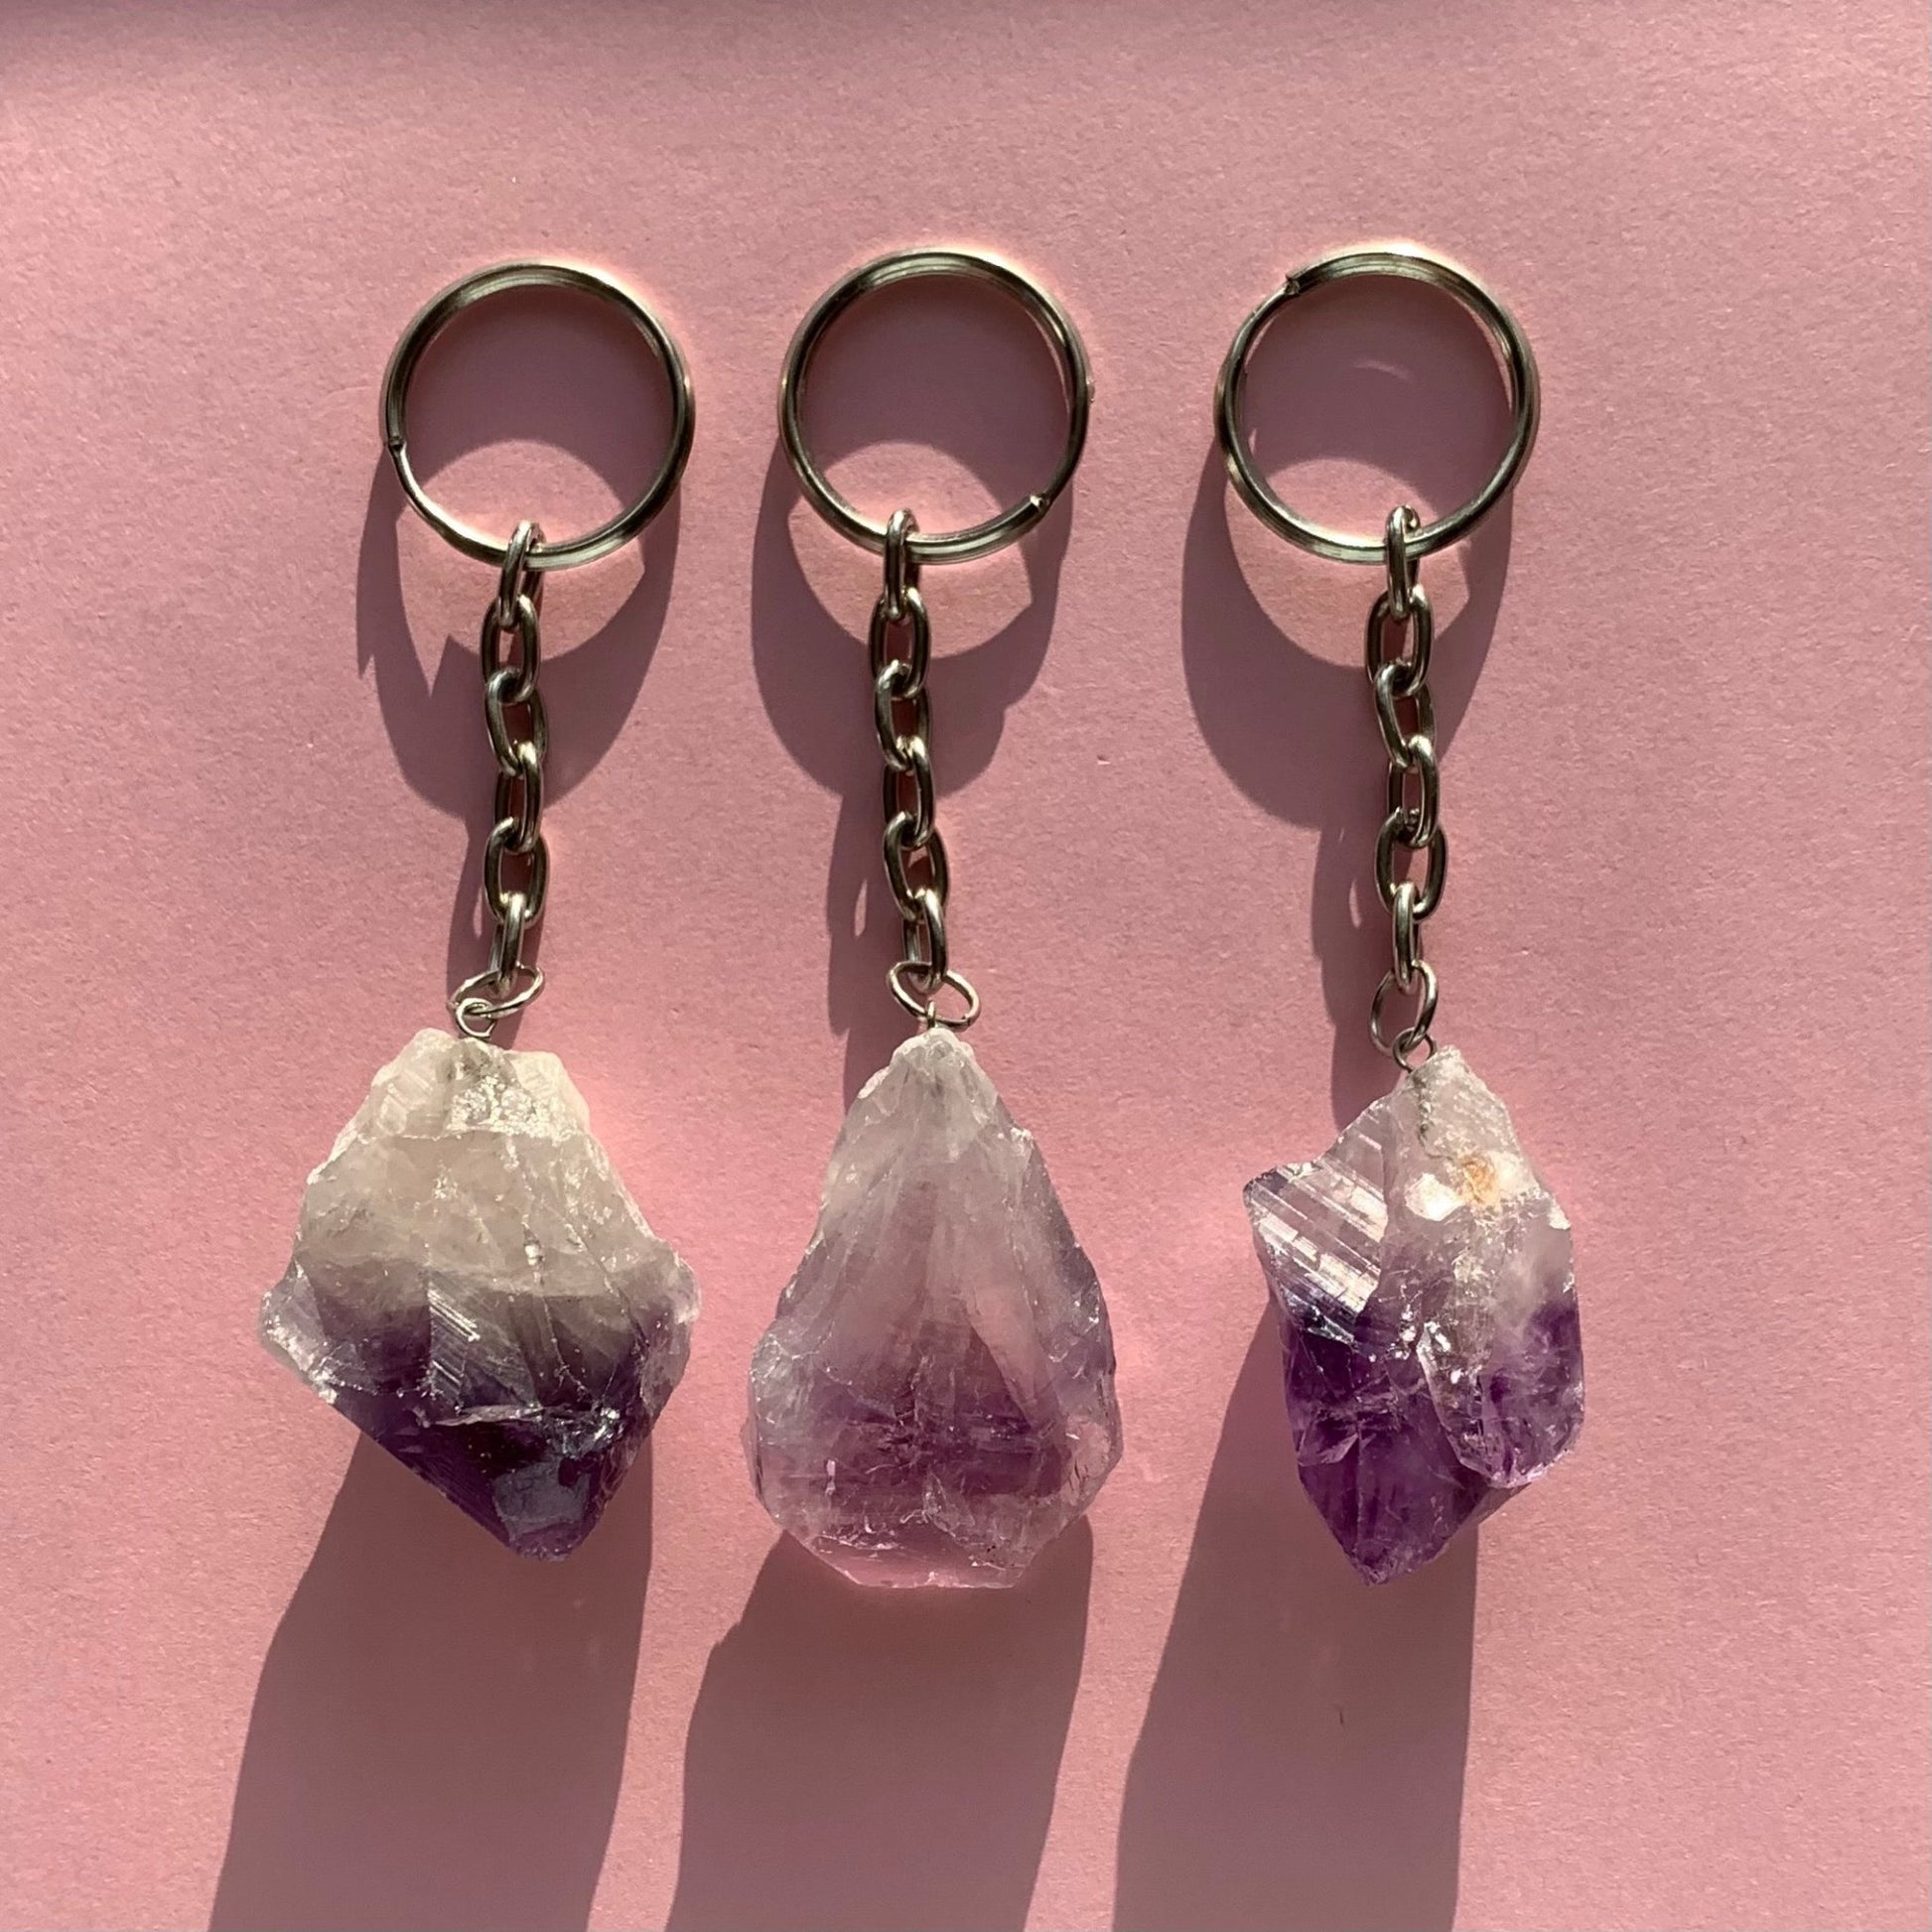 Amethyst Keychain - Conscious Crystals New Zealand Crystal and Spiritual Shop